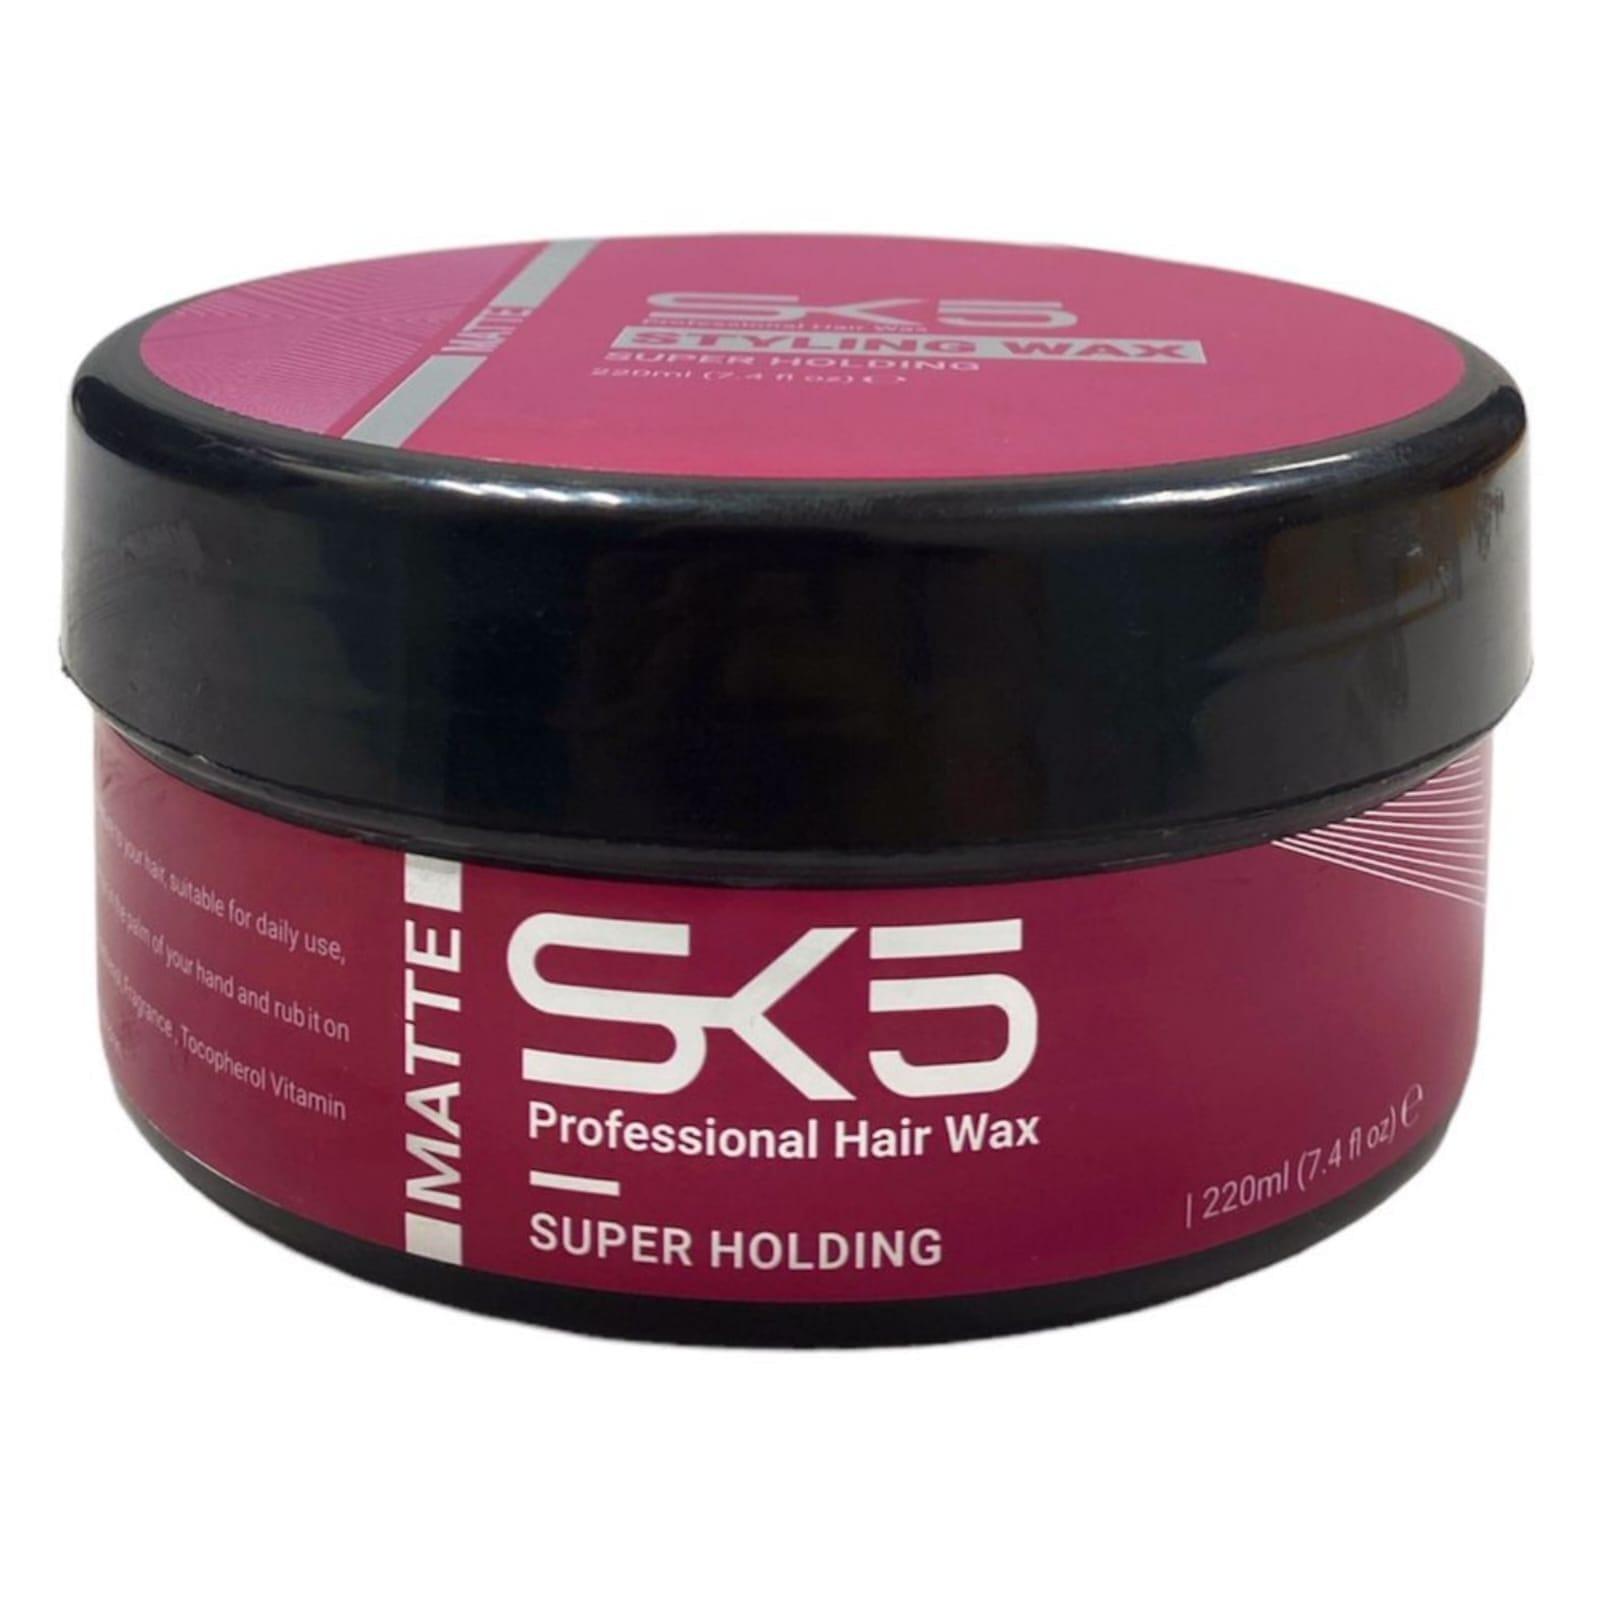 SK5 Styling Wax Super Holding 220ml